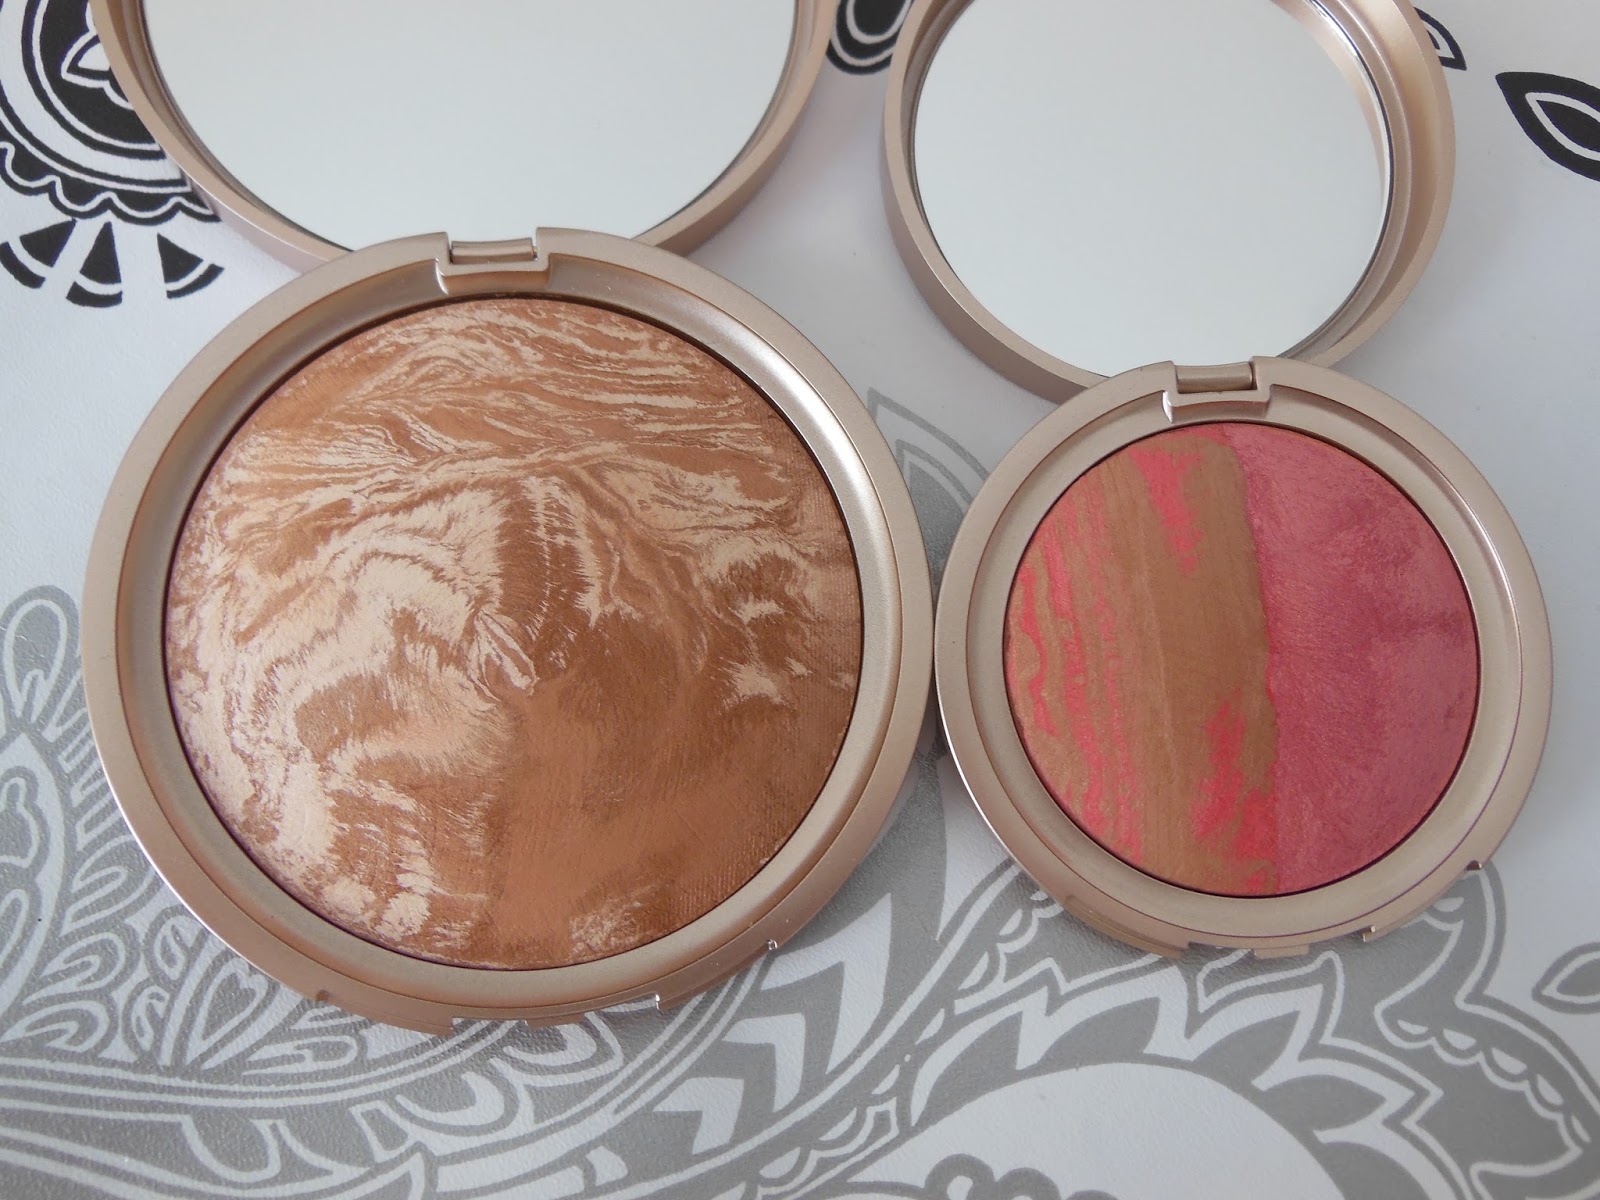 Kiko life in rio collection sun lovers blusher and bronzer